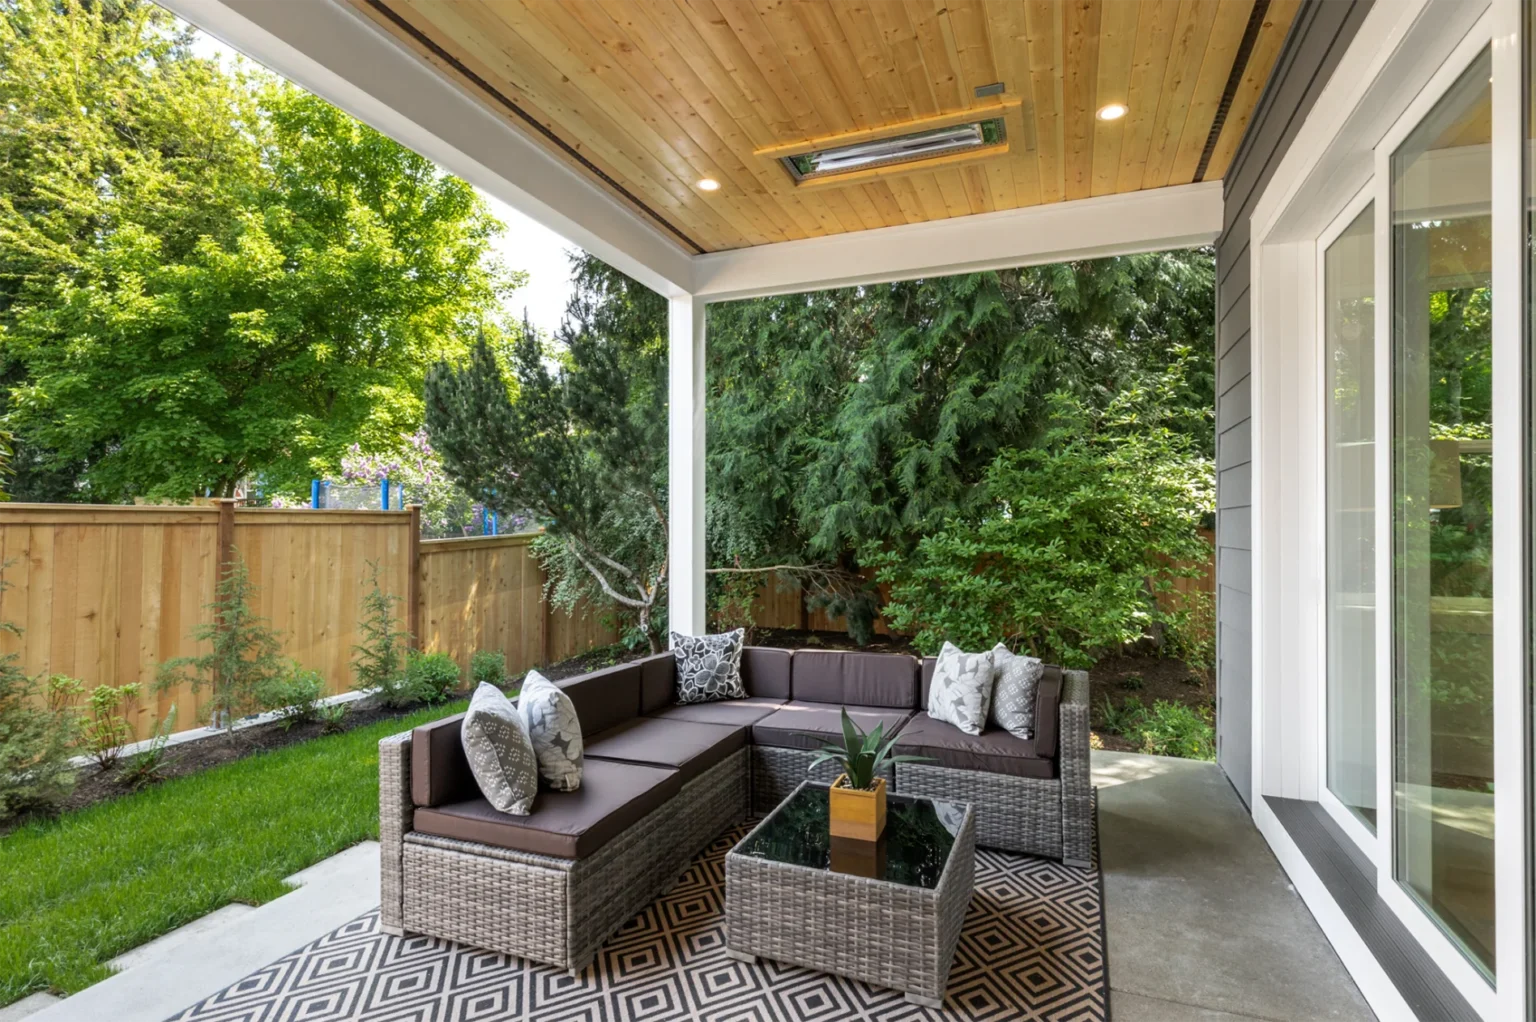 Seattle Transitional Style Exterior back yard covered patio